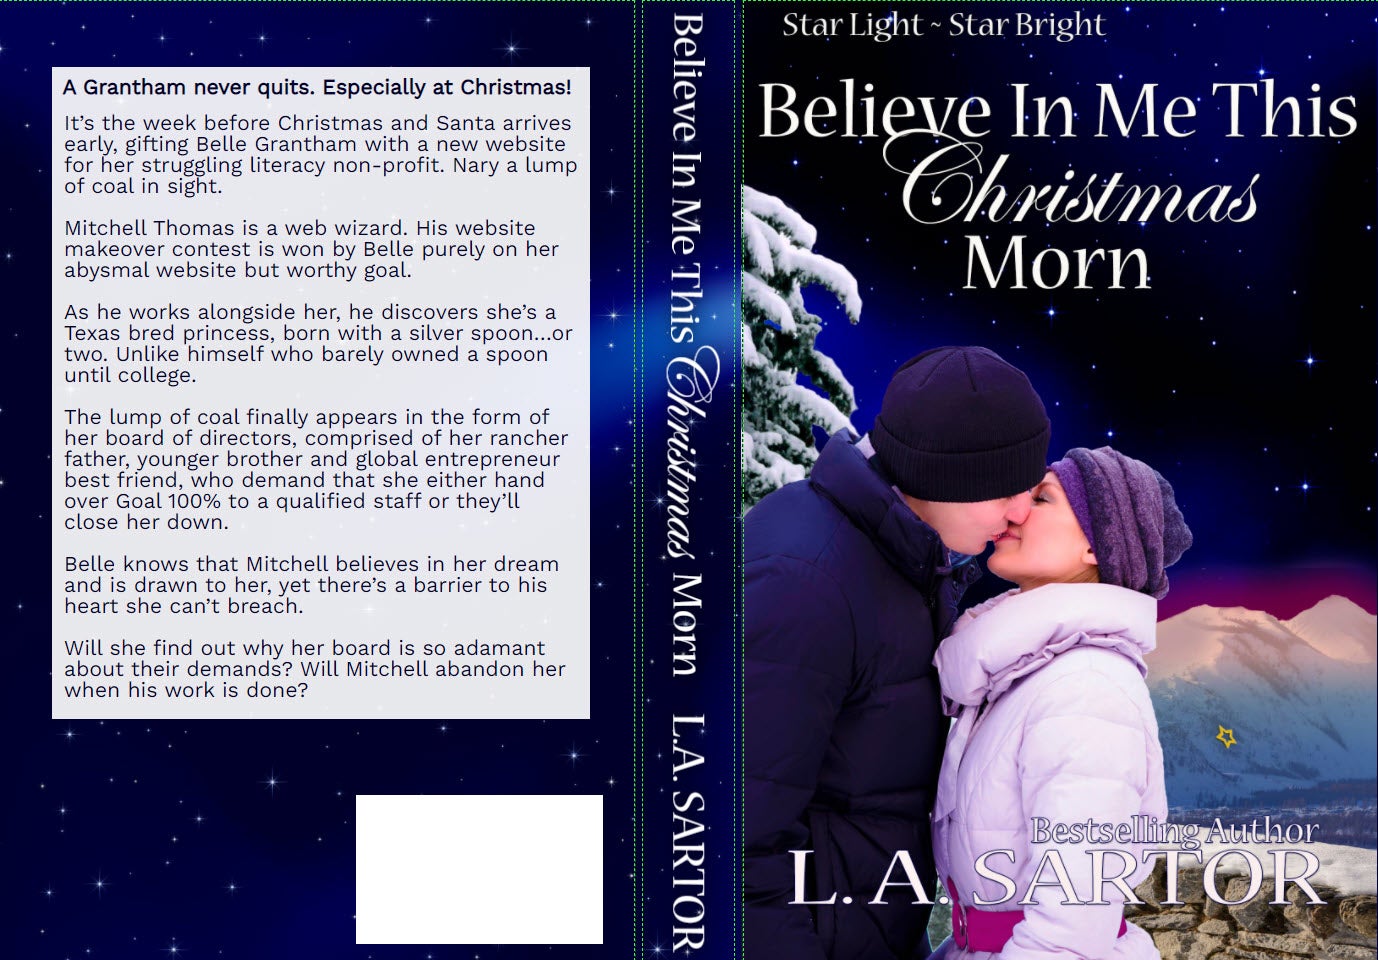 Final Cover of Believe In Me This Christmas Morn paperback by L.A. Sartor